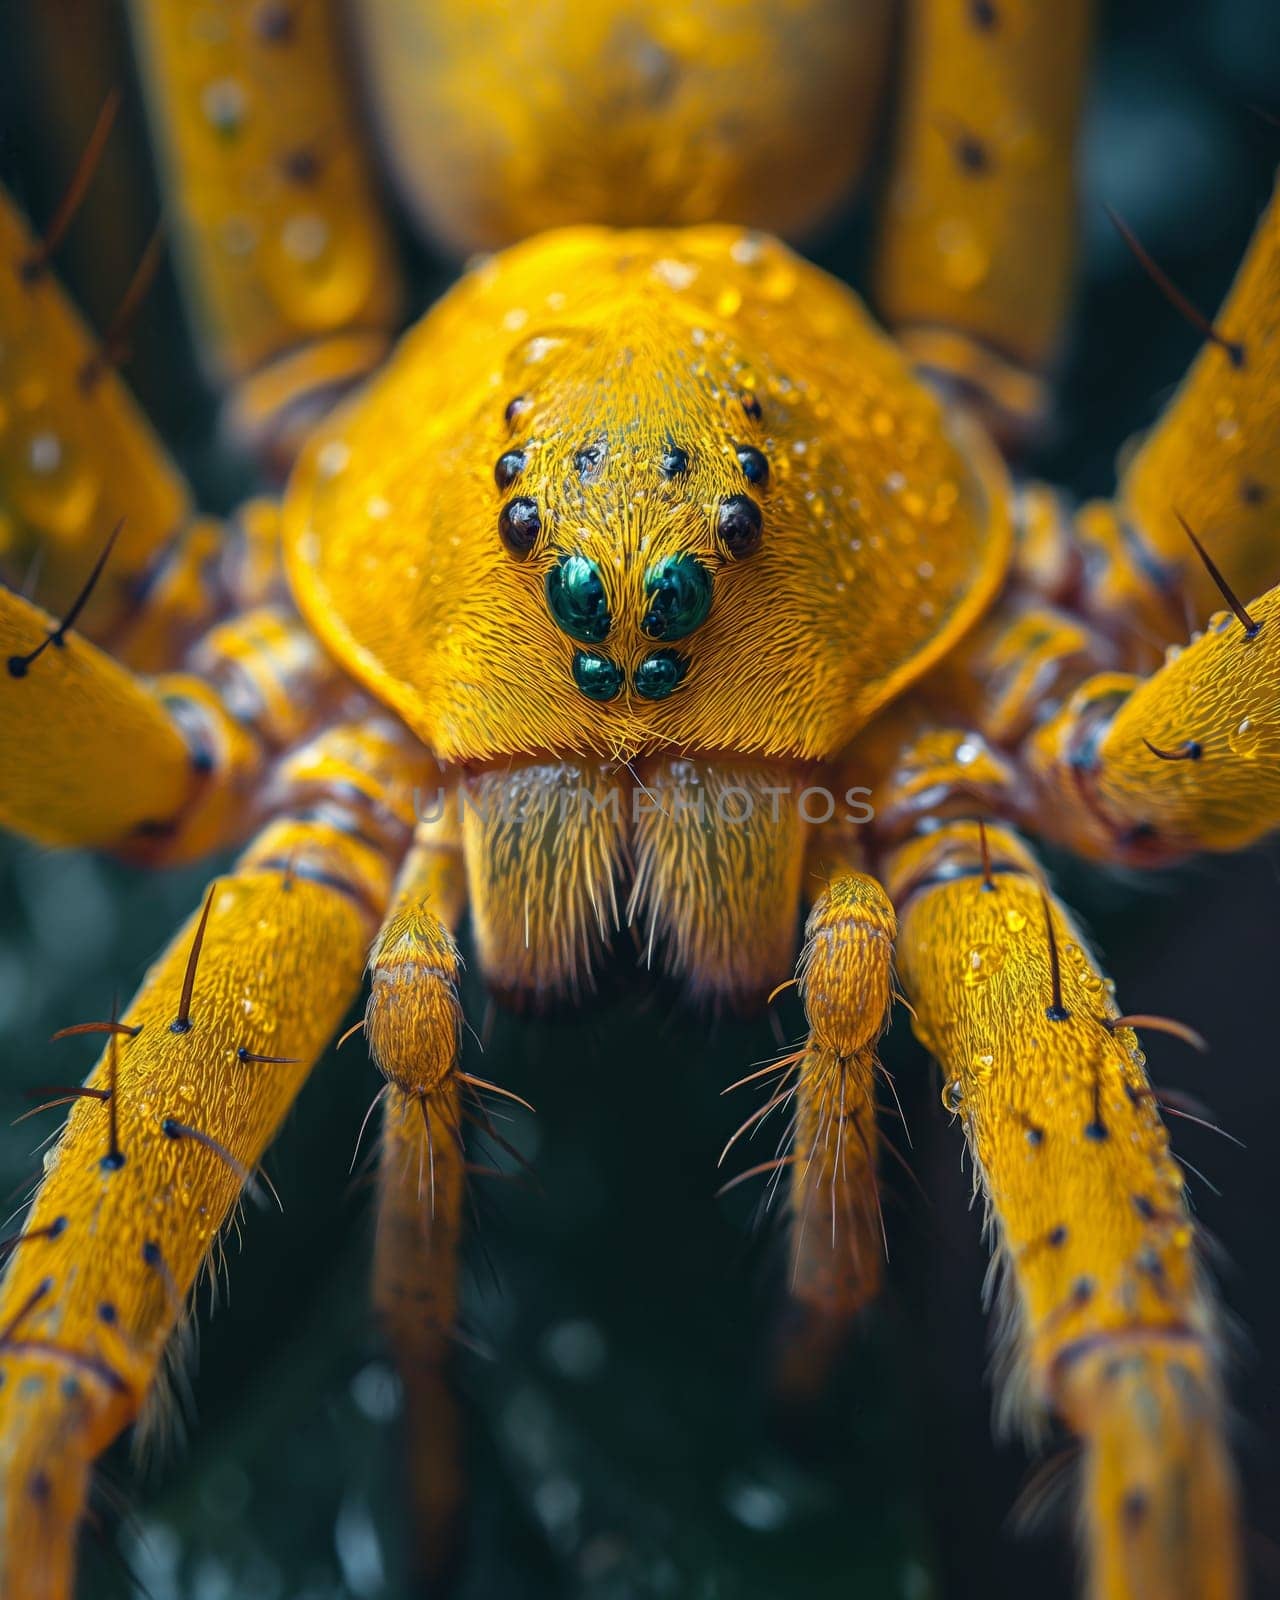 Yellow Spider With Green Eyes Close Up. by Fischeron